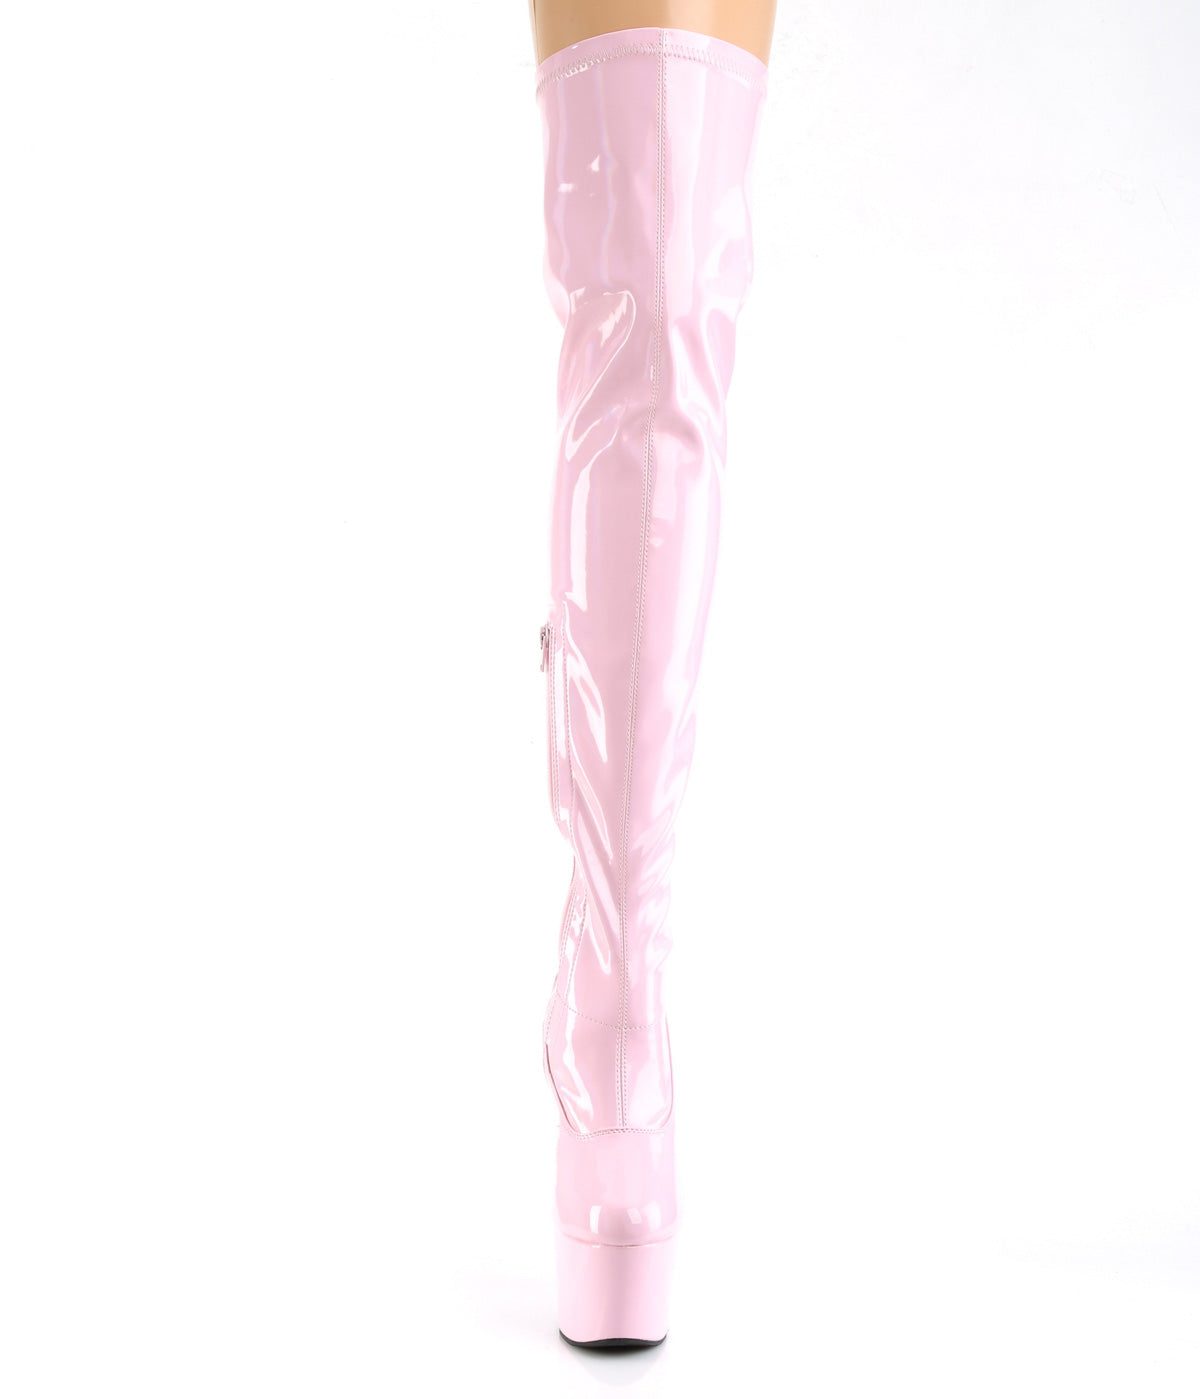 ADORE-3000HWR 7 Inch Heel Baby Pink Pole Dancing Thigh Highs-Pleaser- Sexy Shoes Alternative Footwear